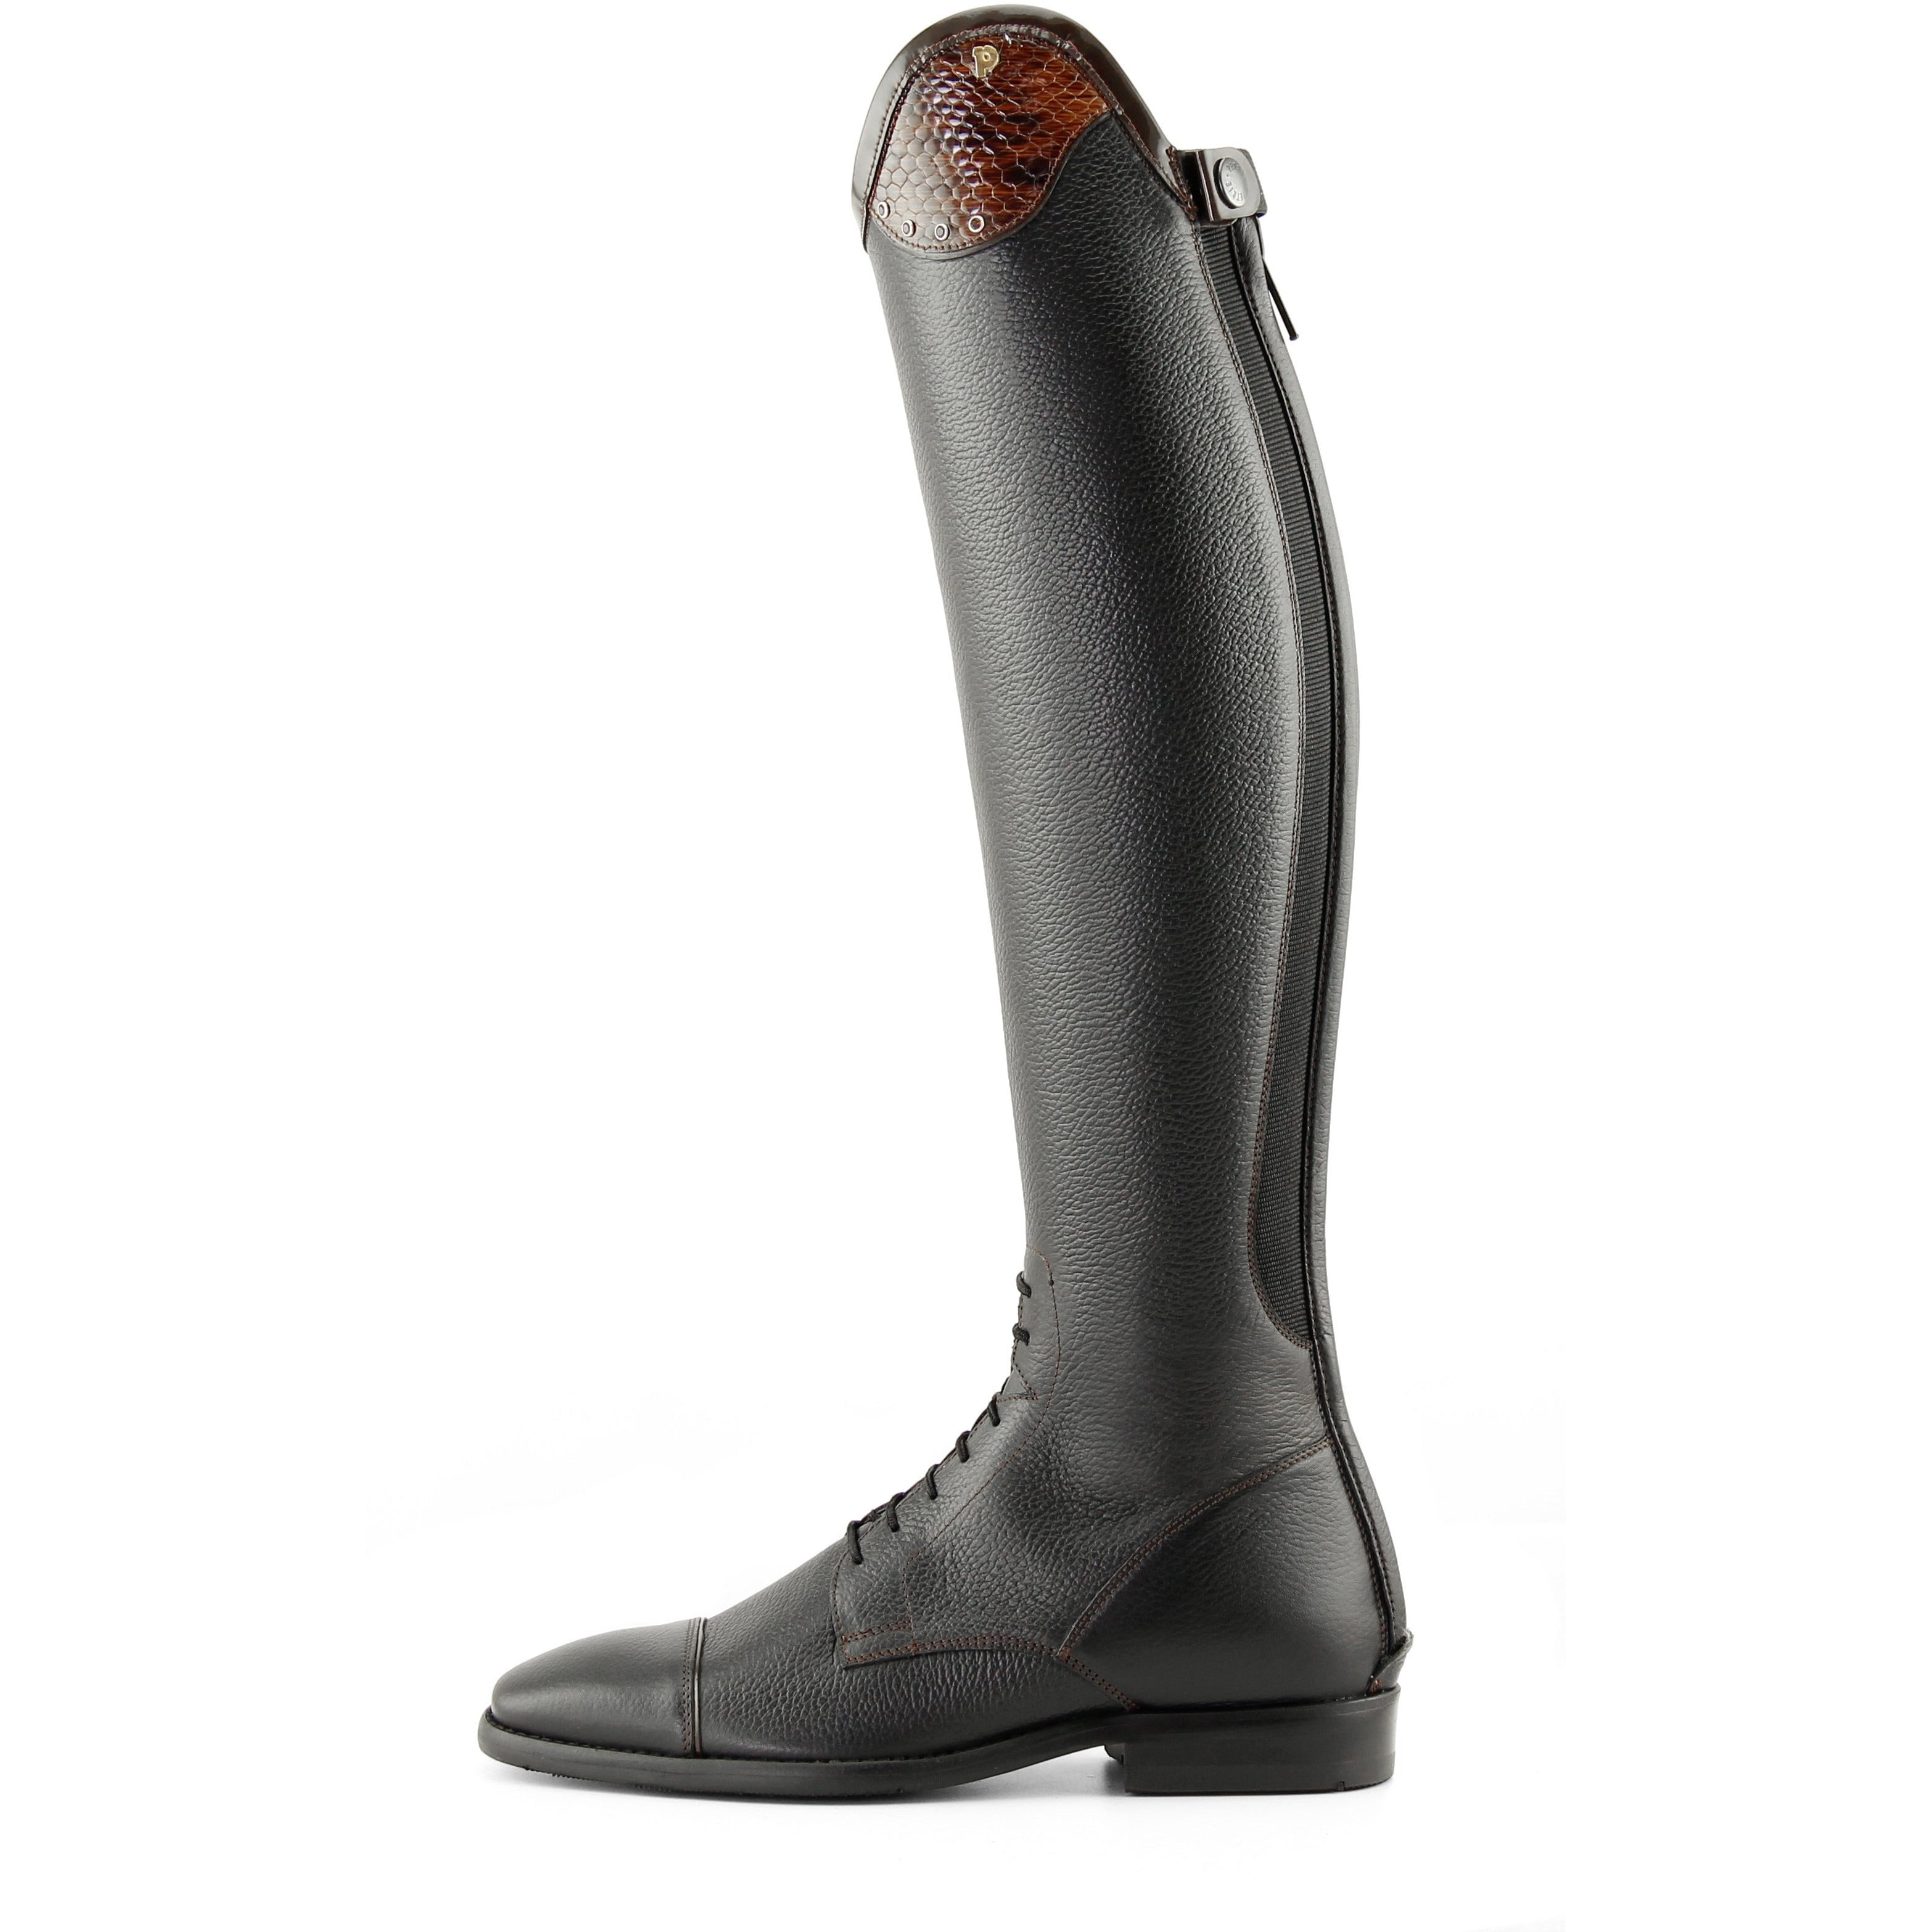 Petrie Luca Boot - Brown - we have some stock but most sizes are to order